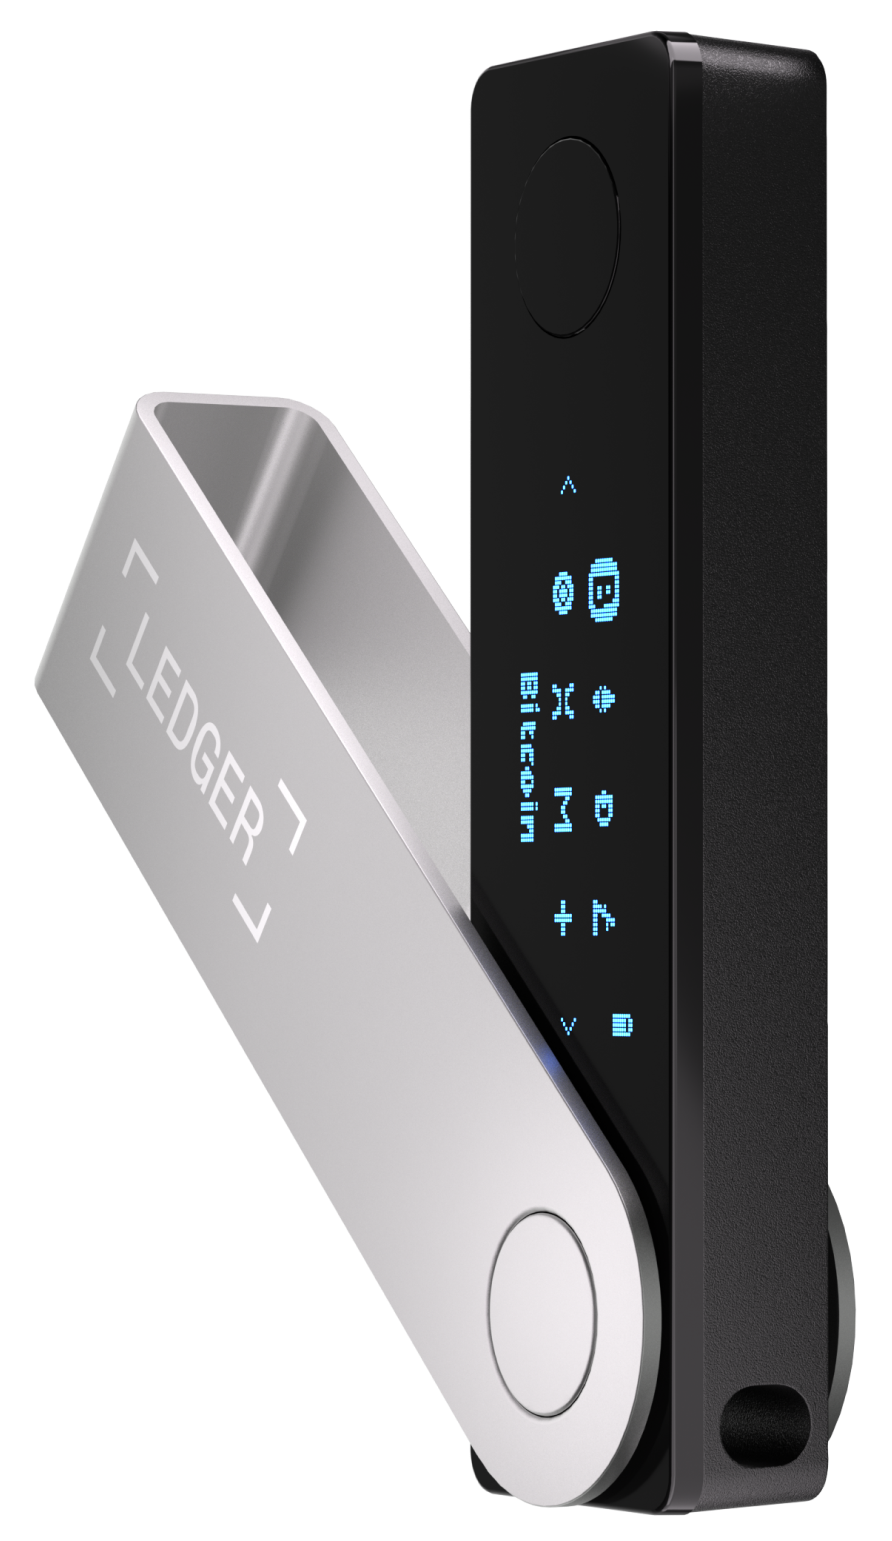 Ledger - Home of the first and only certified Hardware wallets 